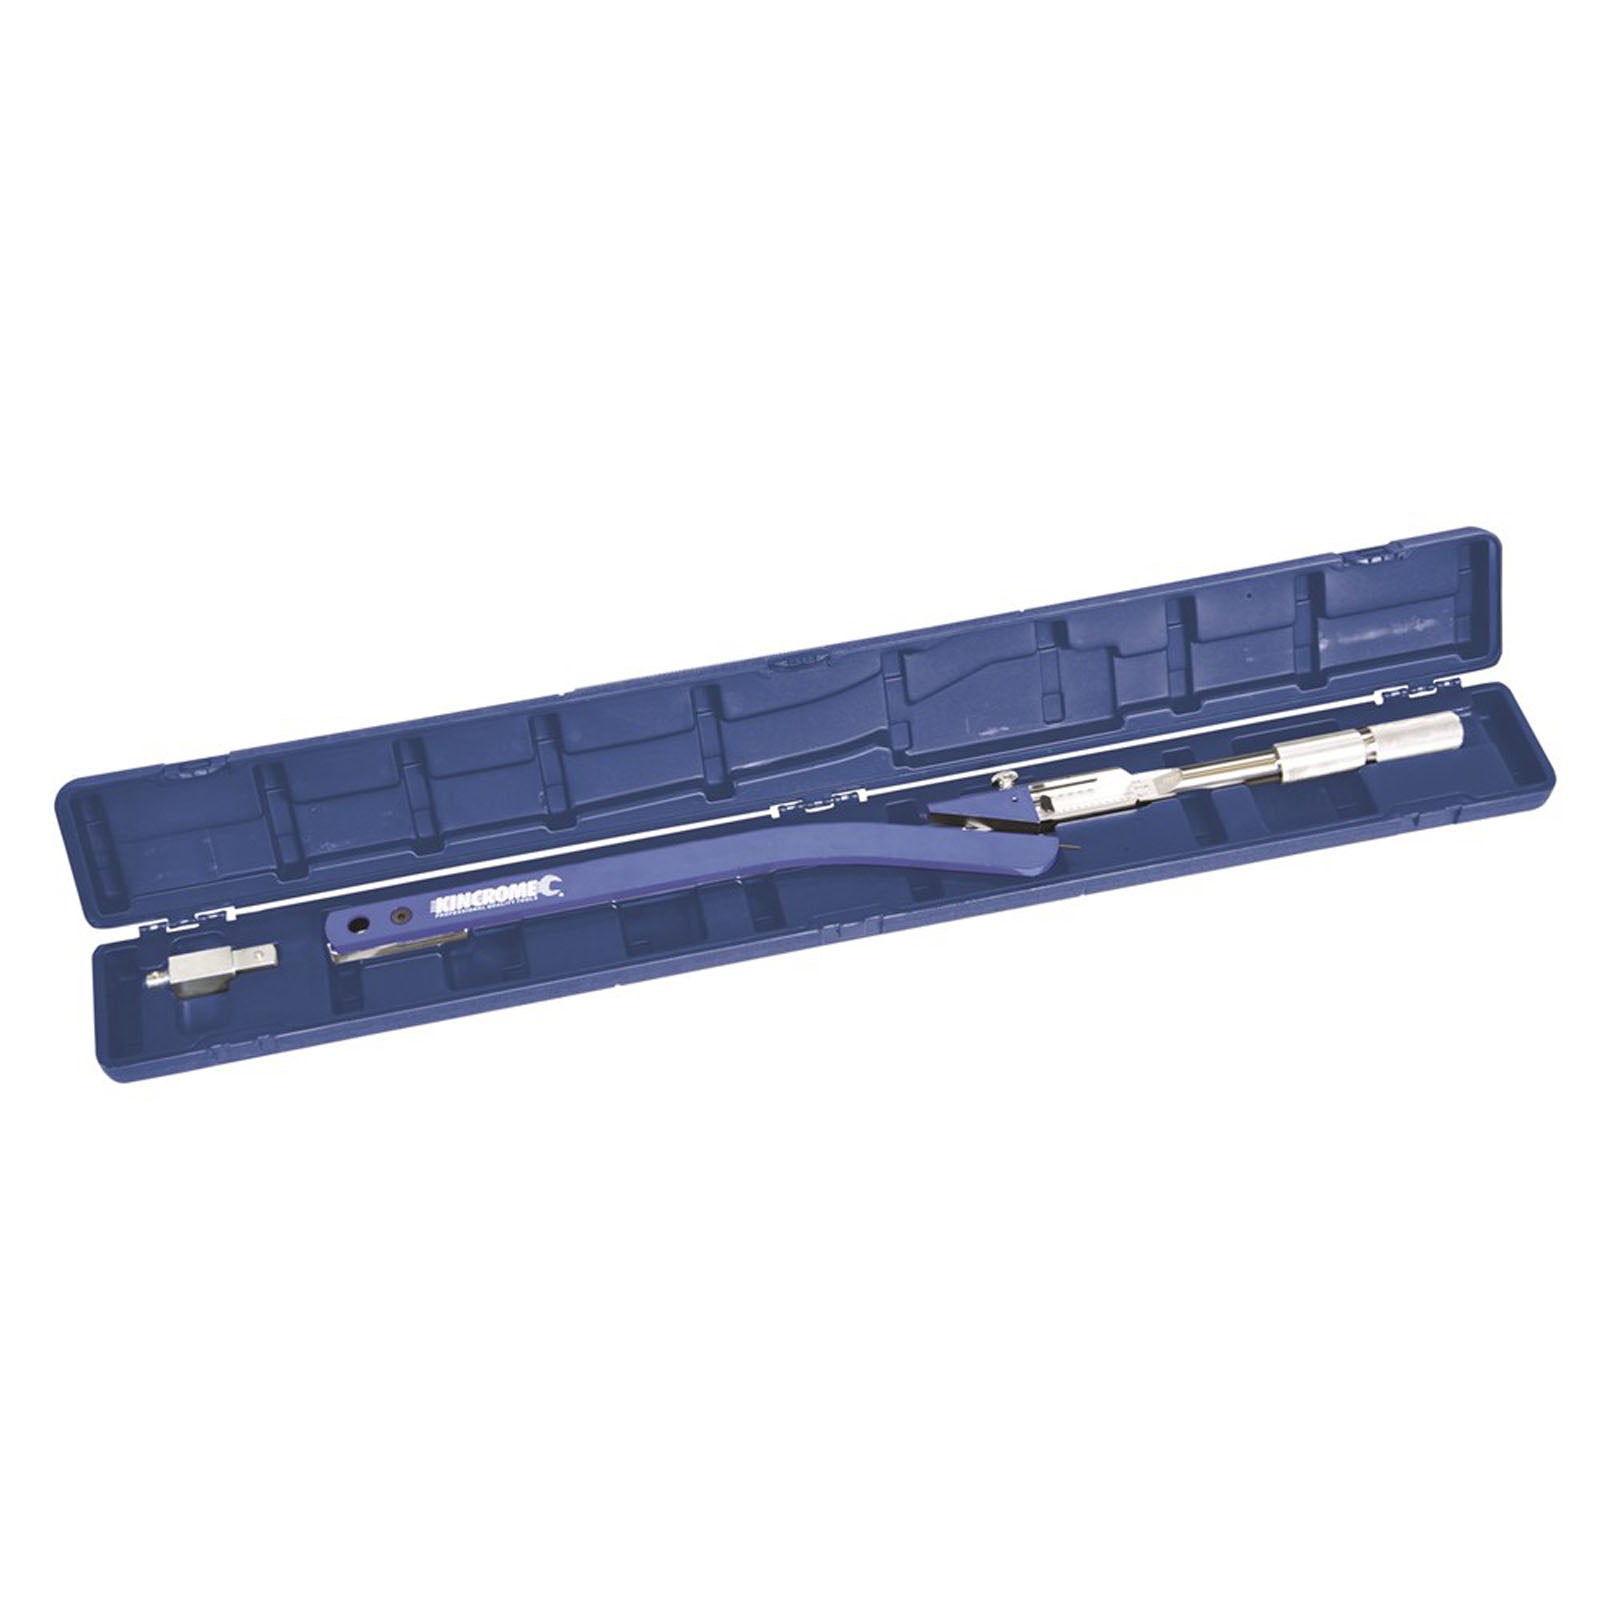 Torque Wrench Deflecting Beam 3/4" Drive - K8034 by Kincrome